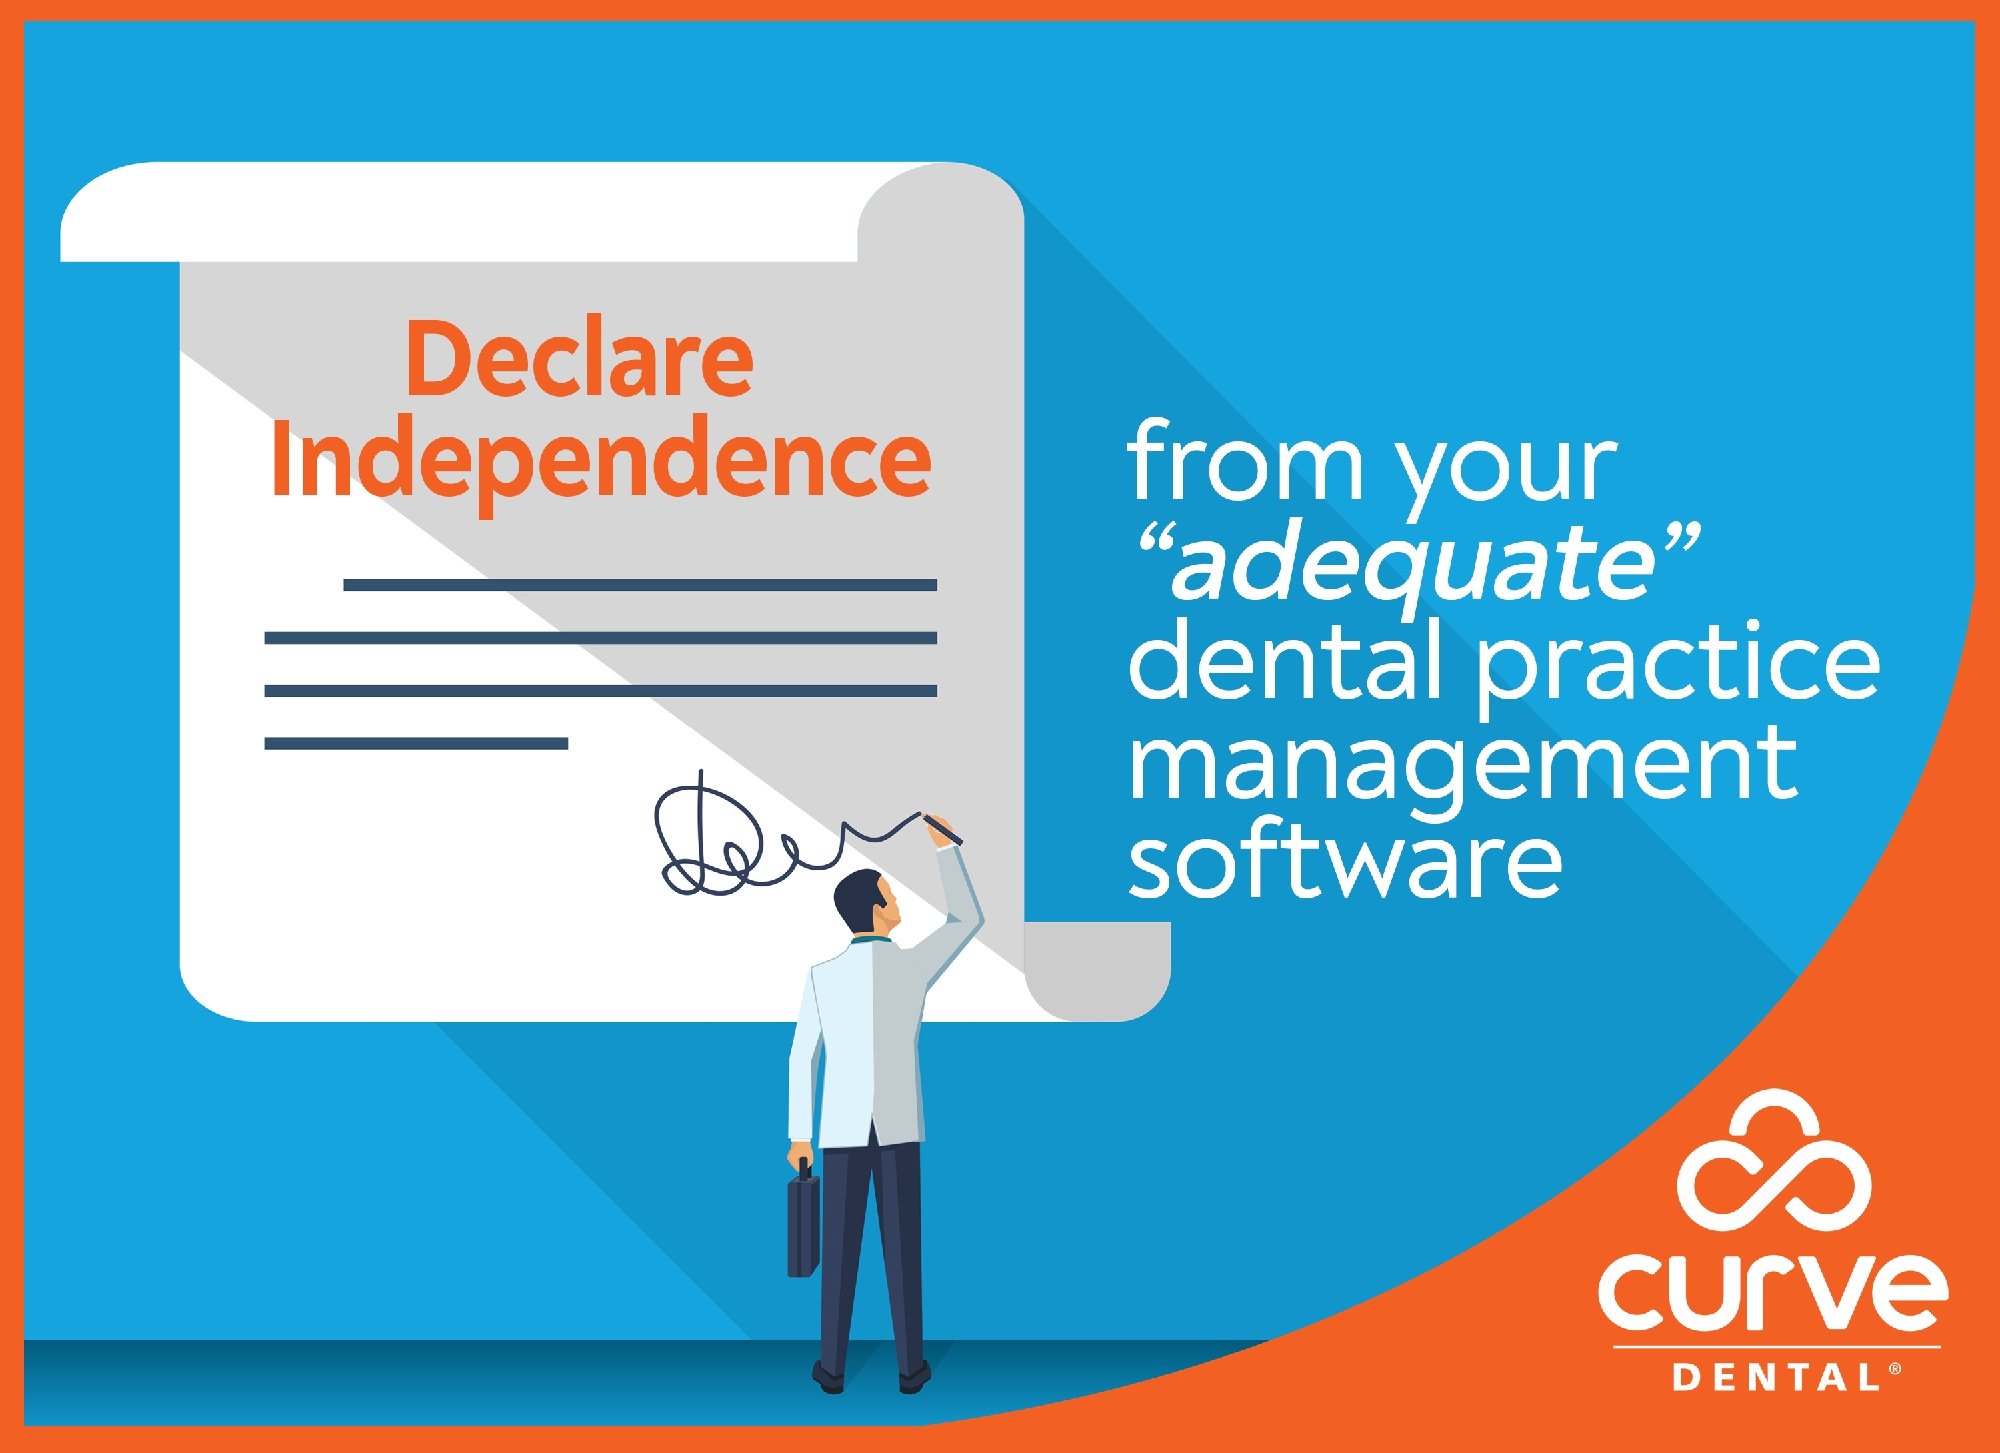 What Are the Best Dental Practice Management Software Features?